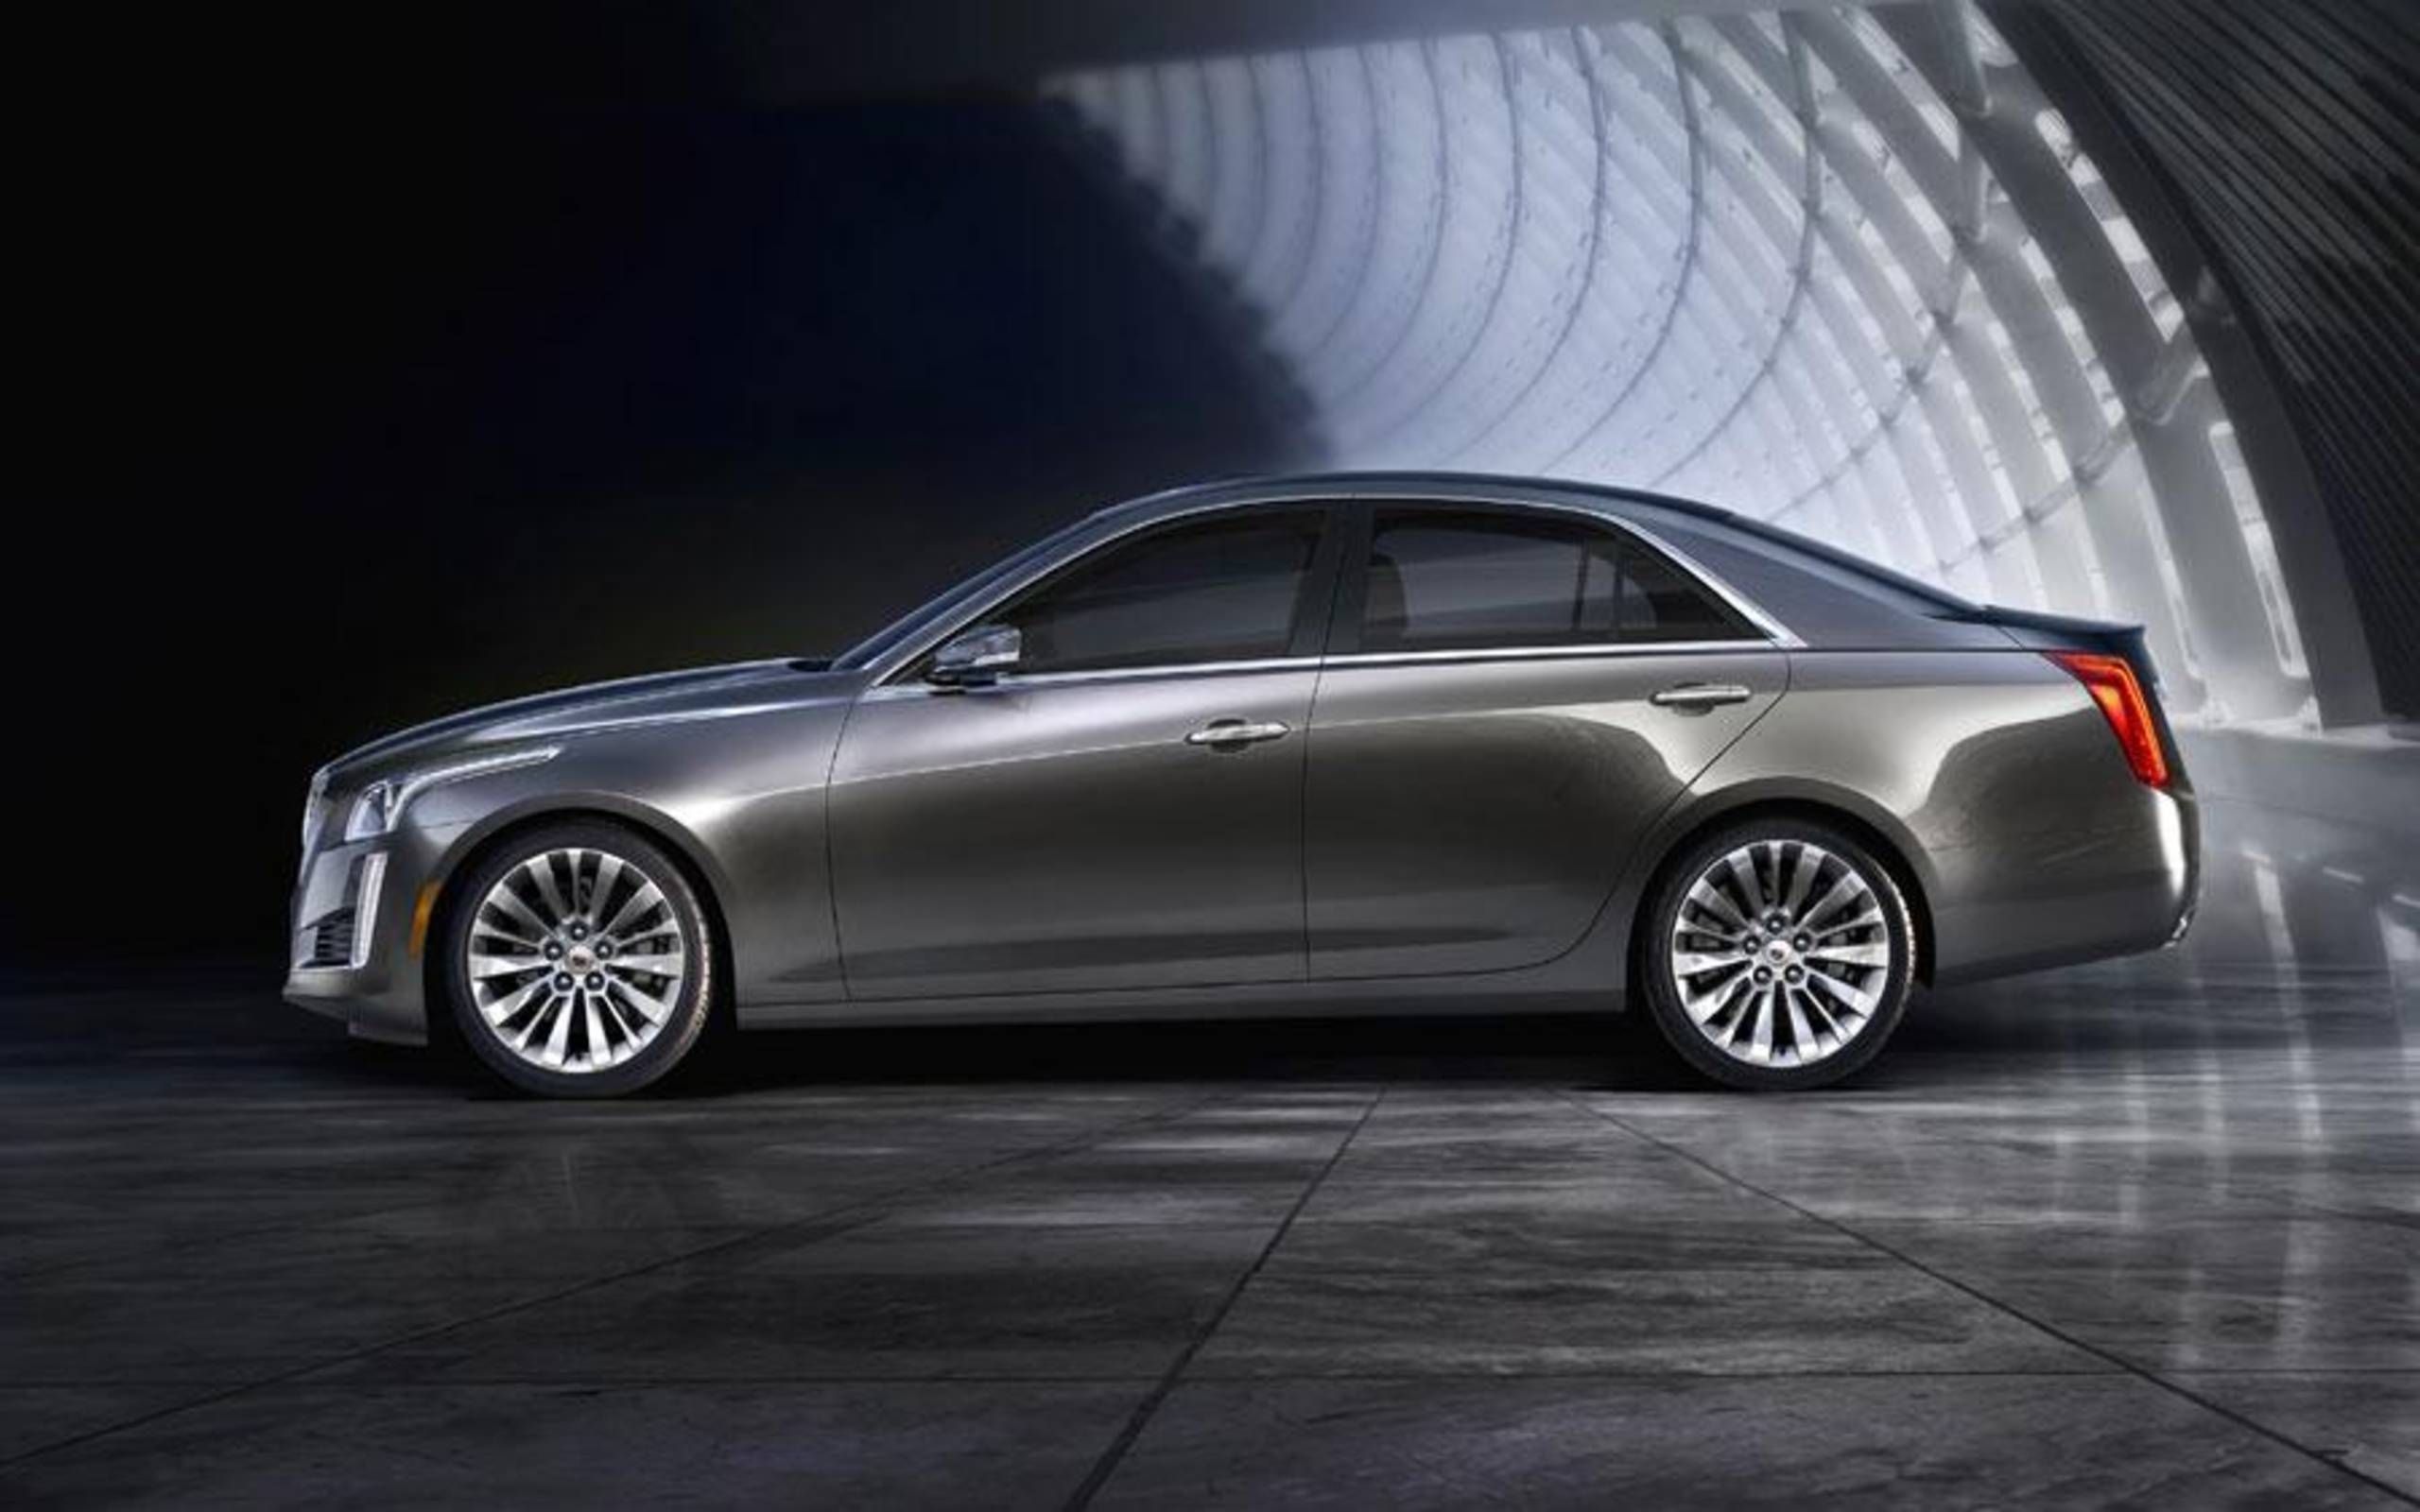 2014 Cadillac CTS 3.6L Premium Collection review notes